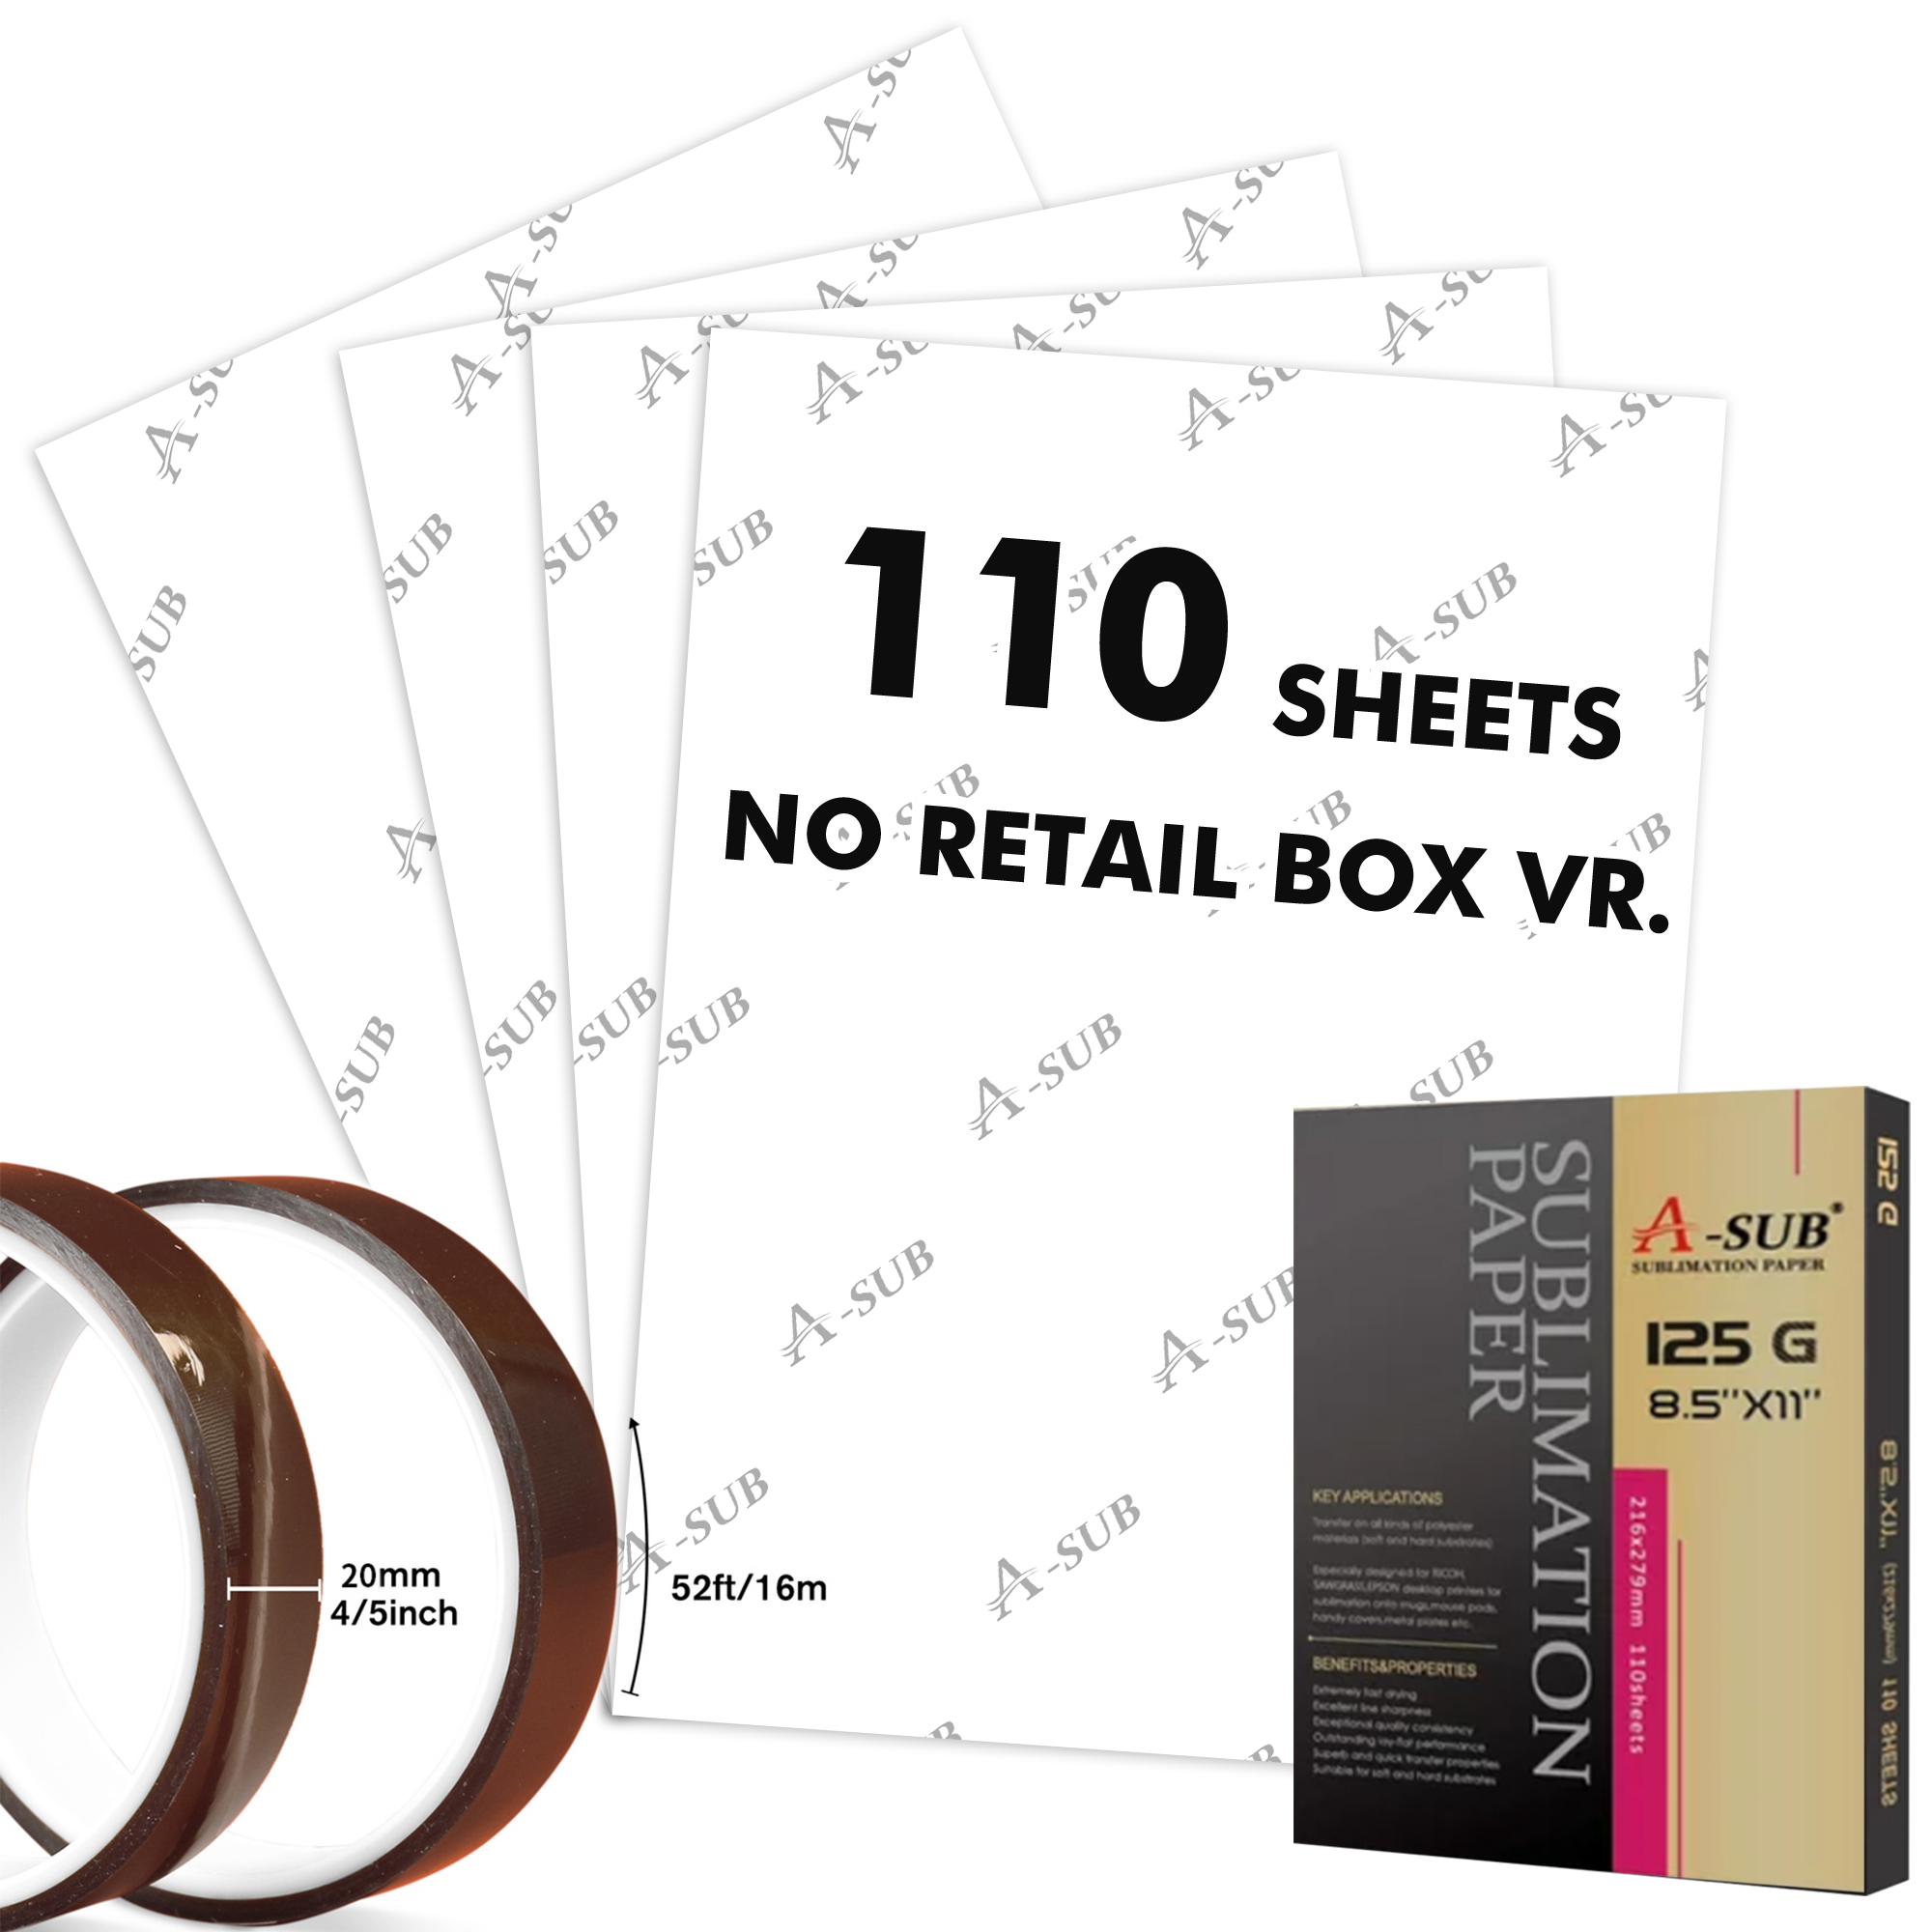 NO RETAIL BOX Vr. A-SUB Sublimation Paper 8.5x11 inches 110 Sheets